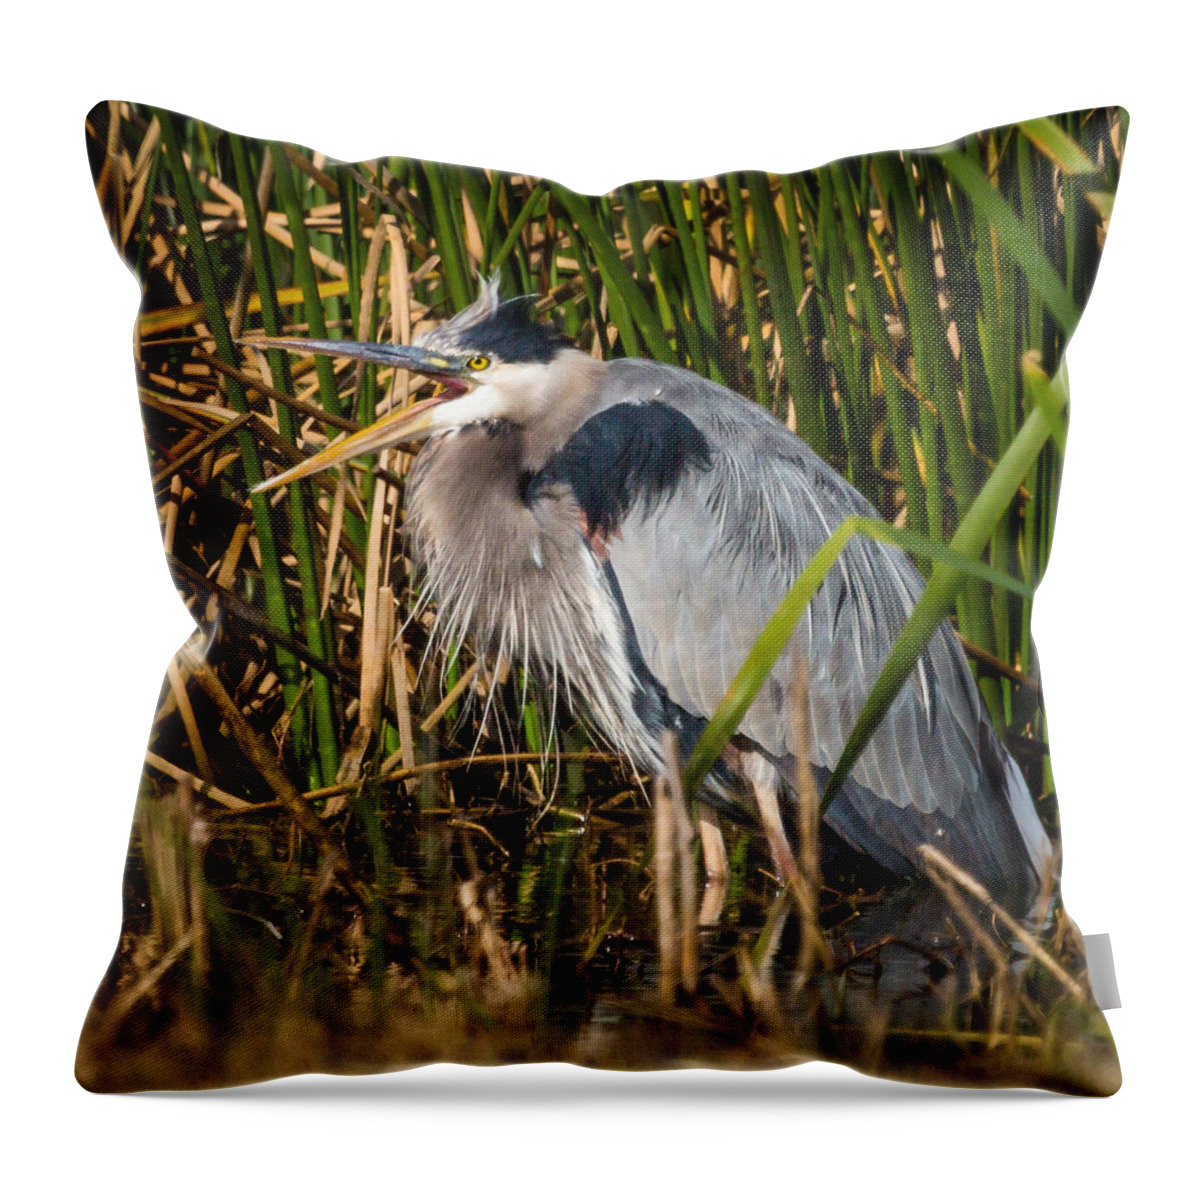 1 Pid Color Open Throw Pillow featuring the photograph Squawking Heron by Gregory Daley MPSA